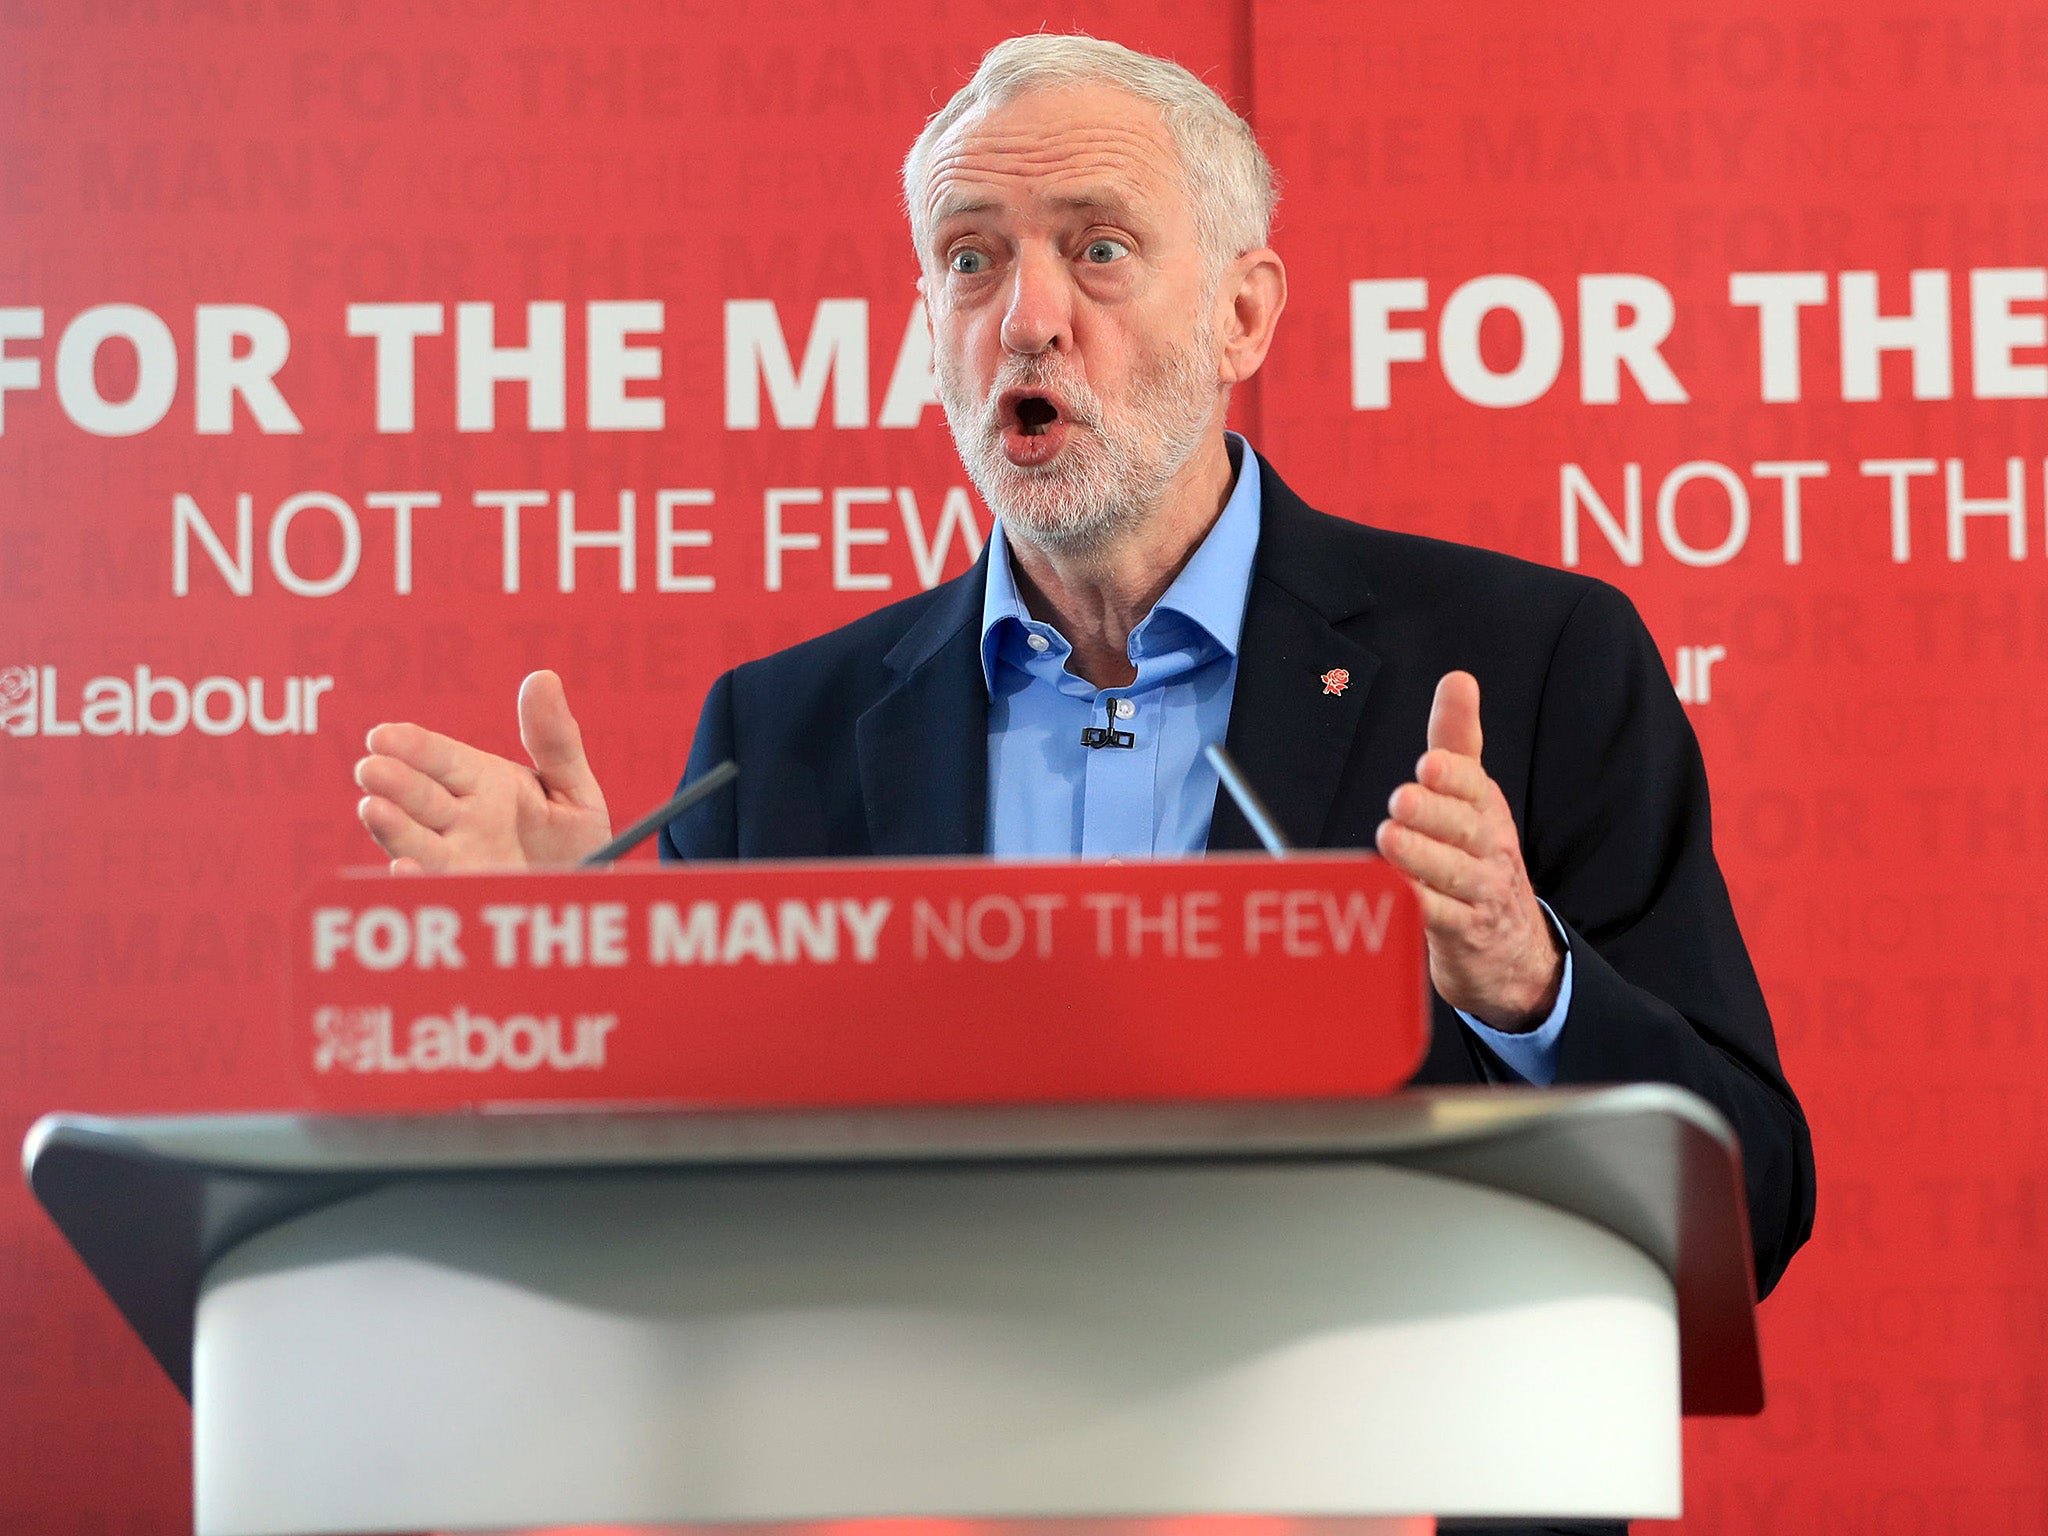 Jeremy Corbyn reacted with shock to the CPS announcement